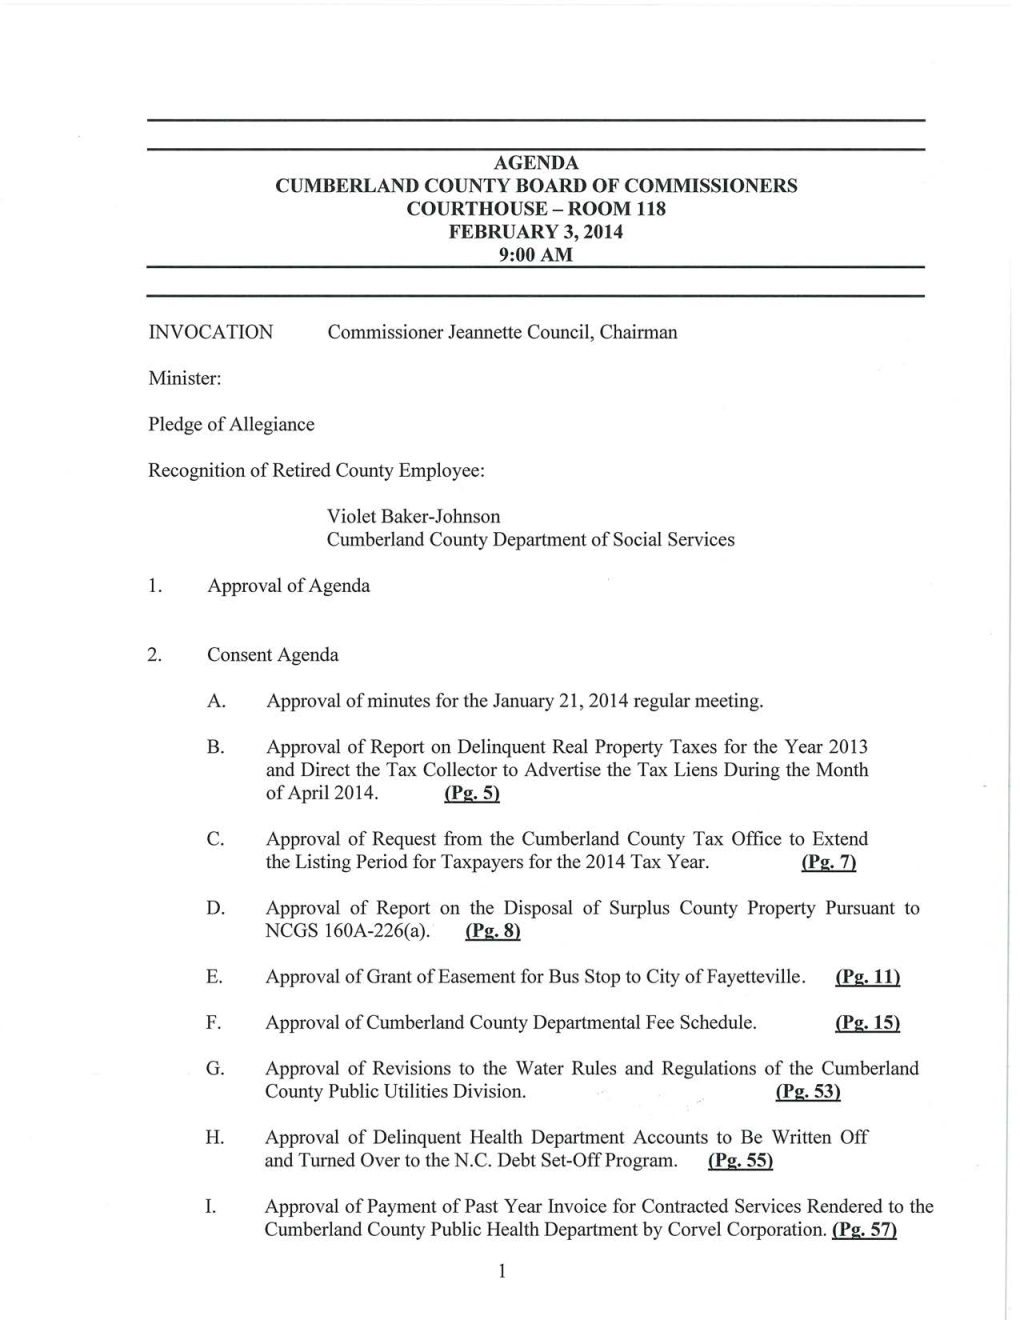 Agenda Cumberland County Board of Commissioners Courthouse- Room 118 February 3, 2014 9:00Am